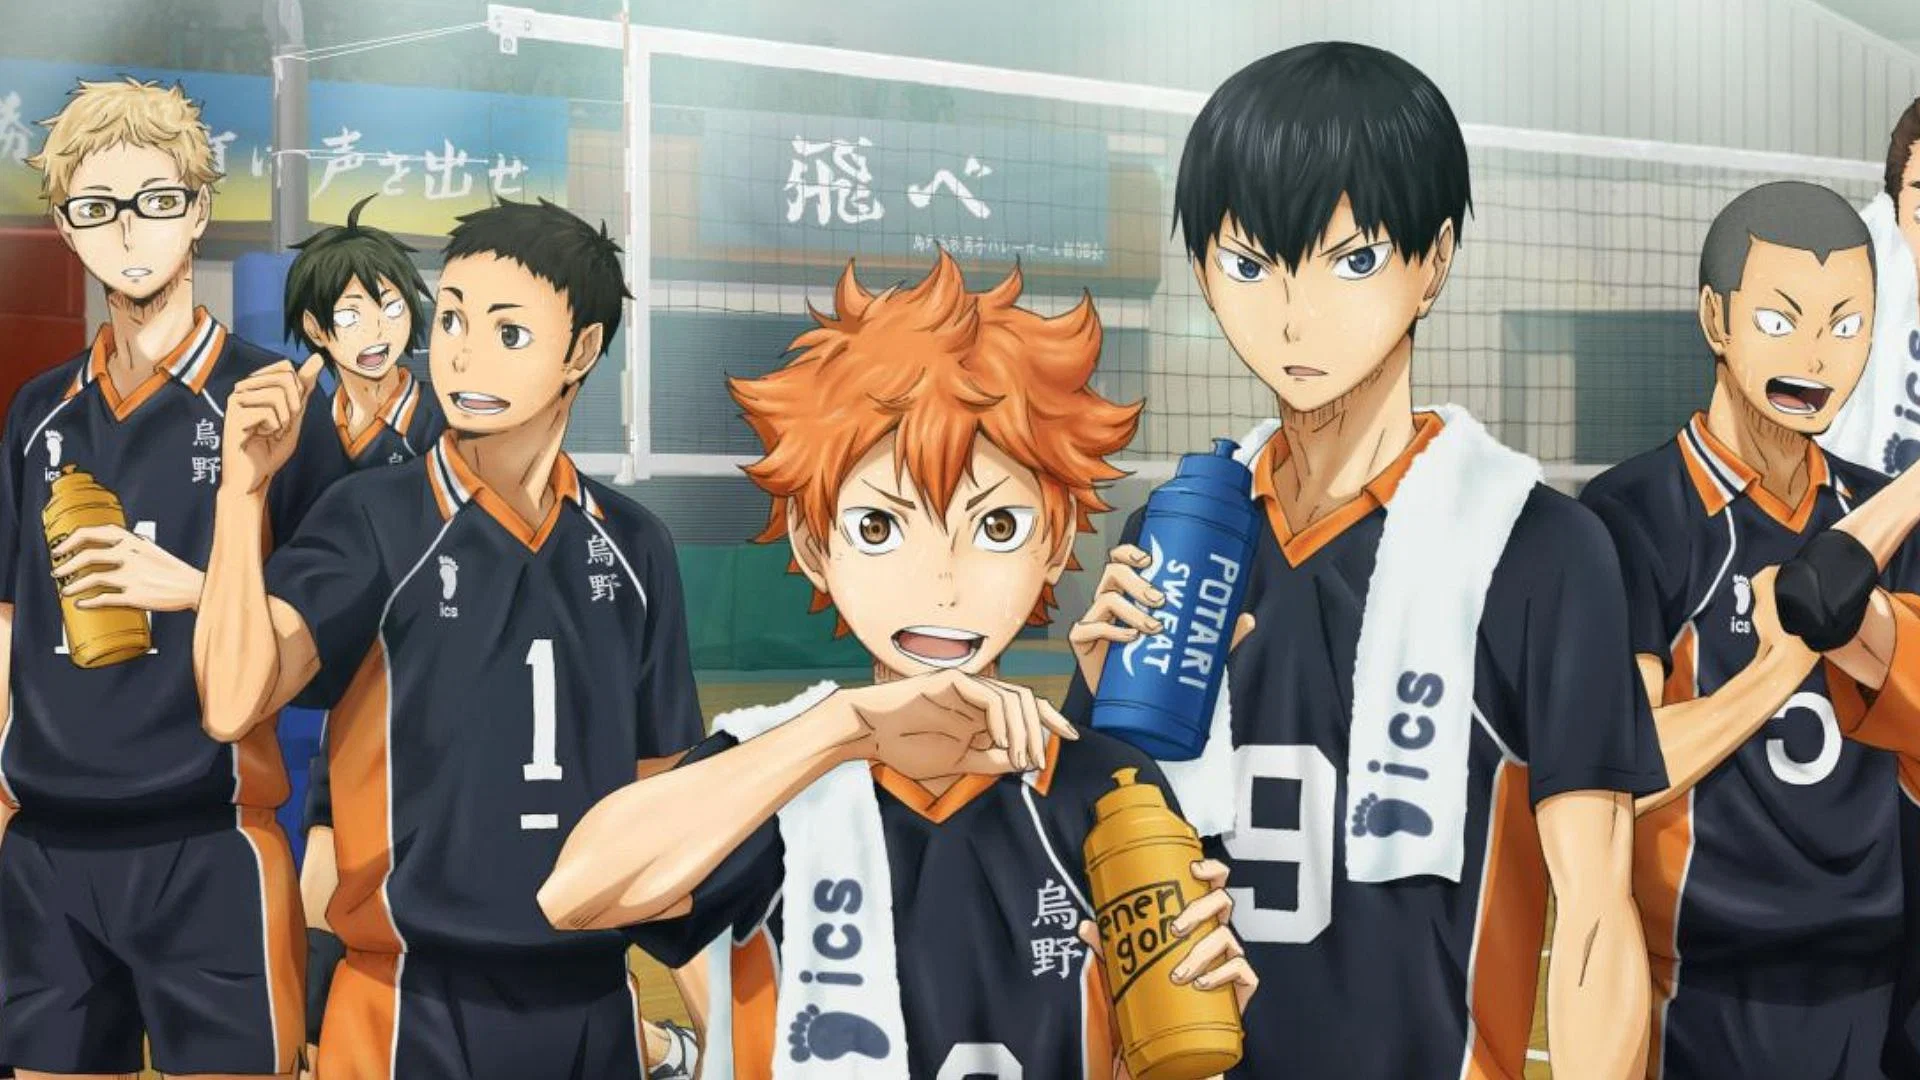 Epic Showdown Alert: Haikyuu!! Wraps a Decade with Blockbuster Volleyball Movie Duels